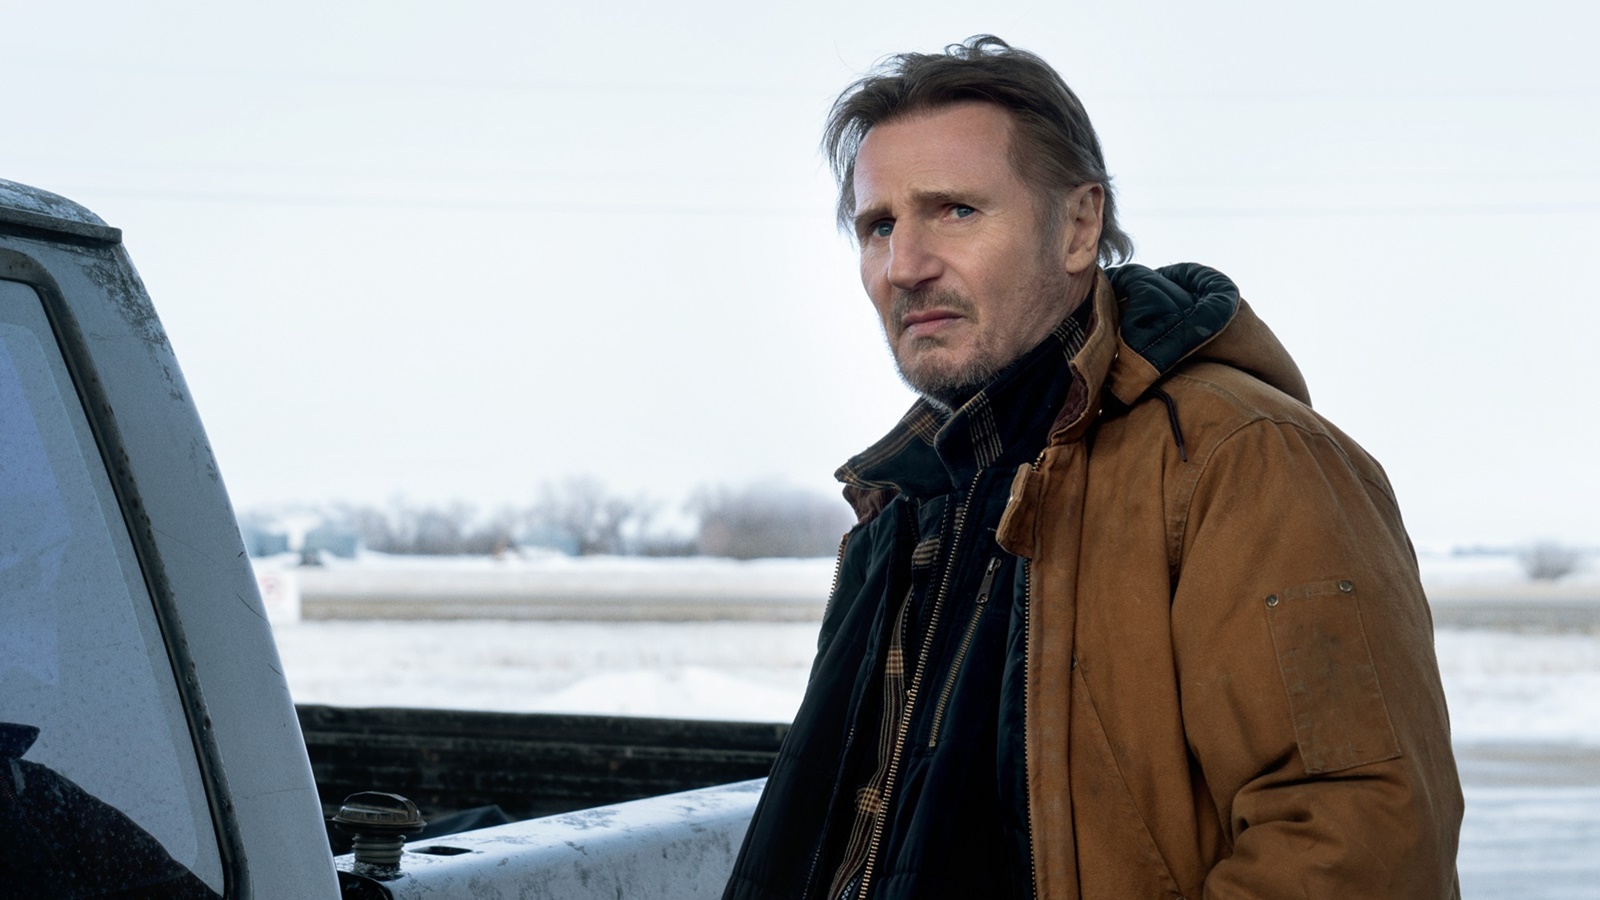 Iceman 2: Amazon wins the sequel with Liam Neeson with a record amount